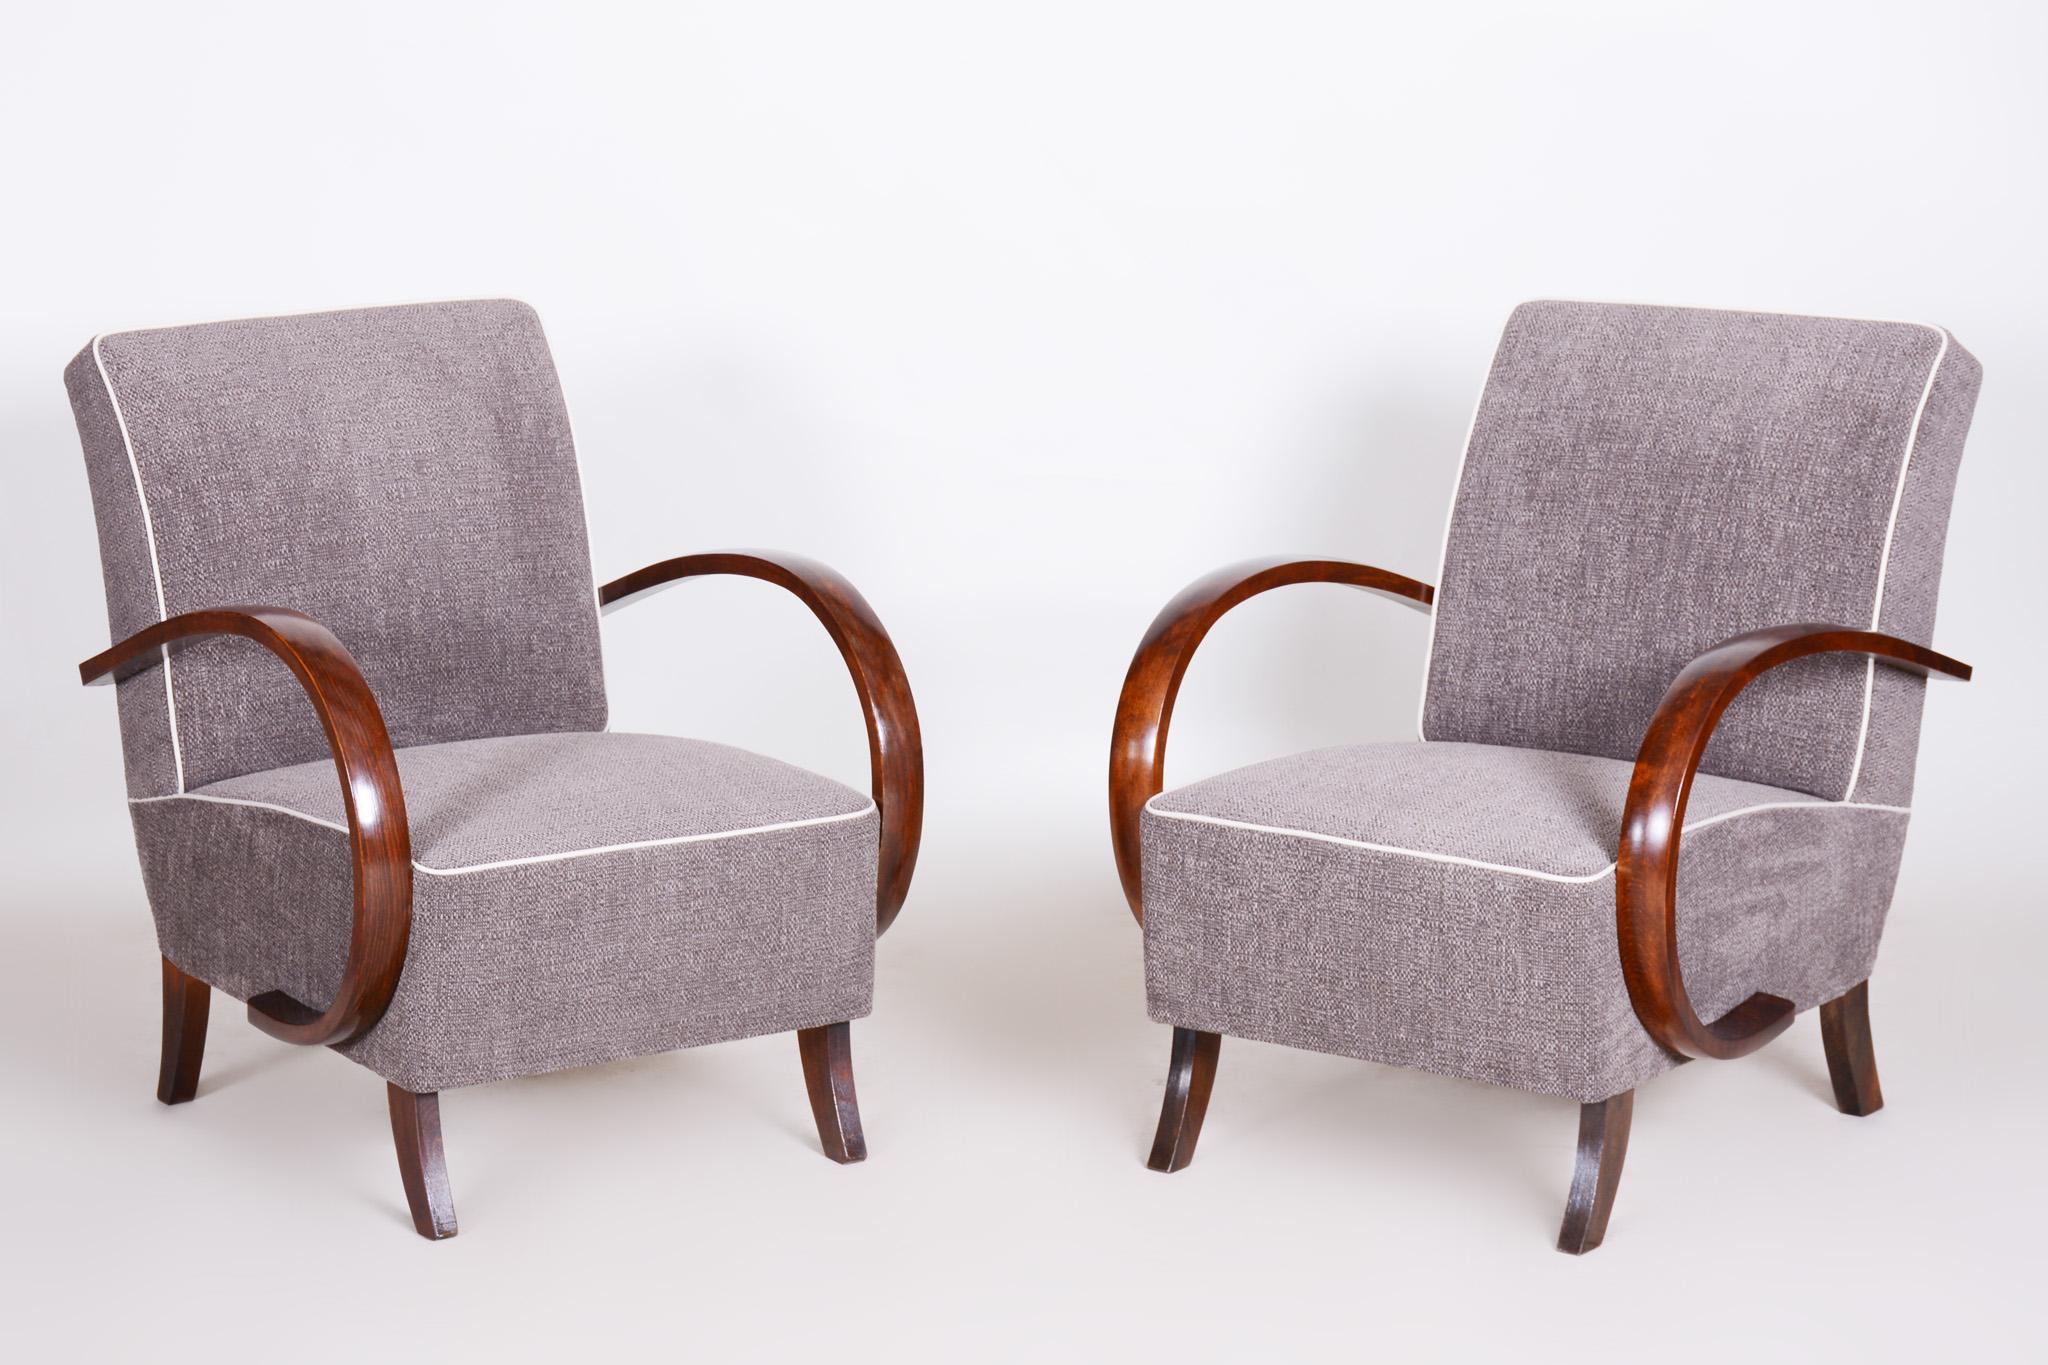 Art Deco armchairs made out of beech, fully restored by our team.